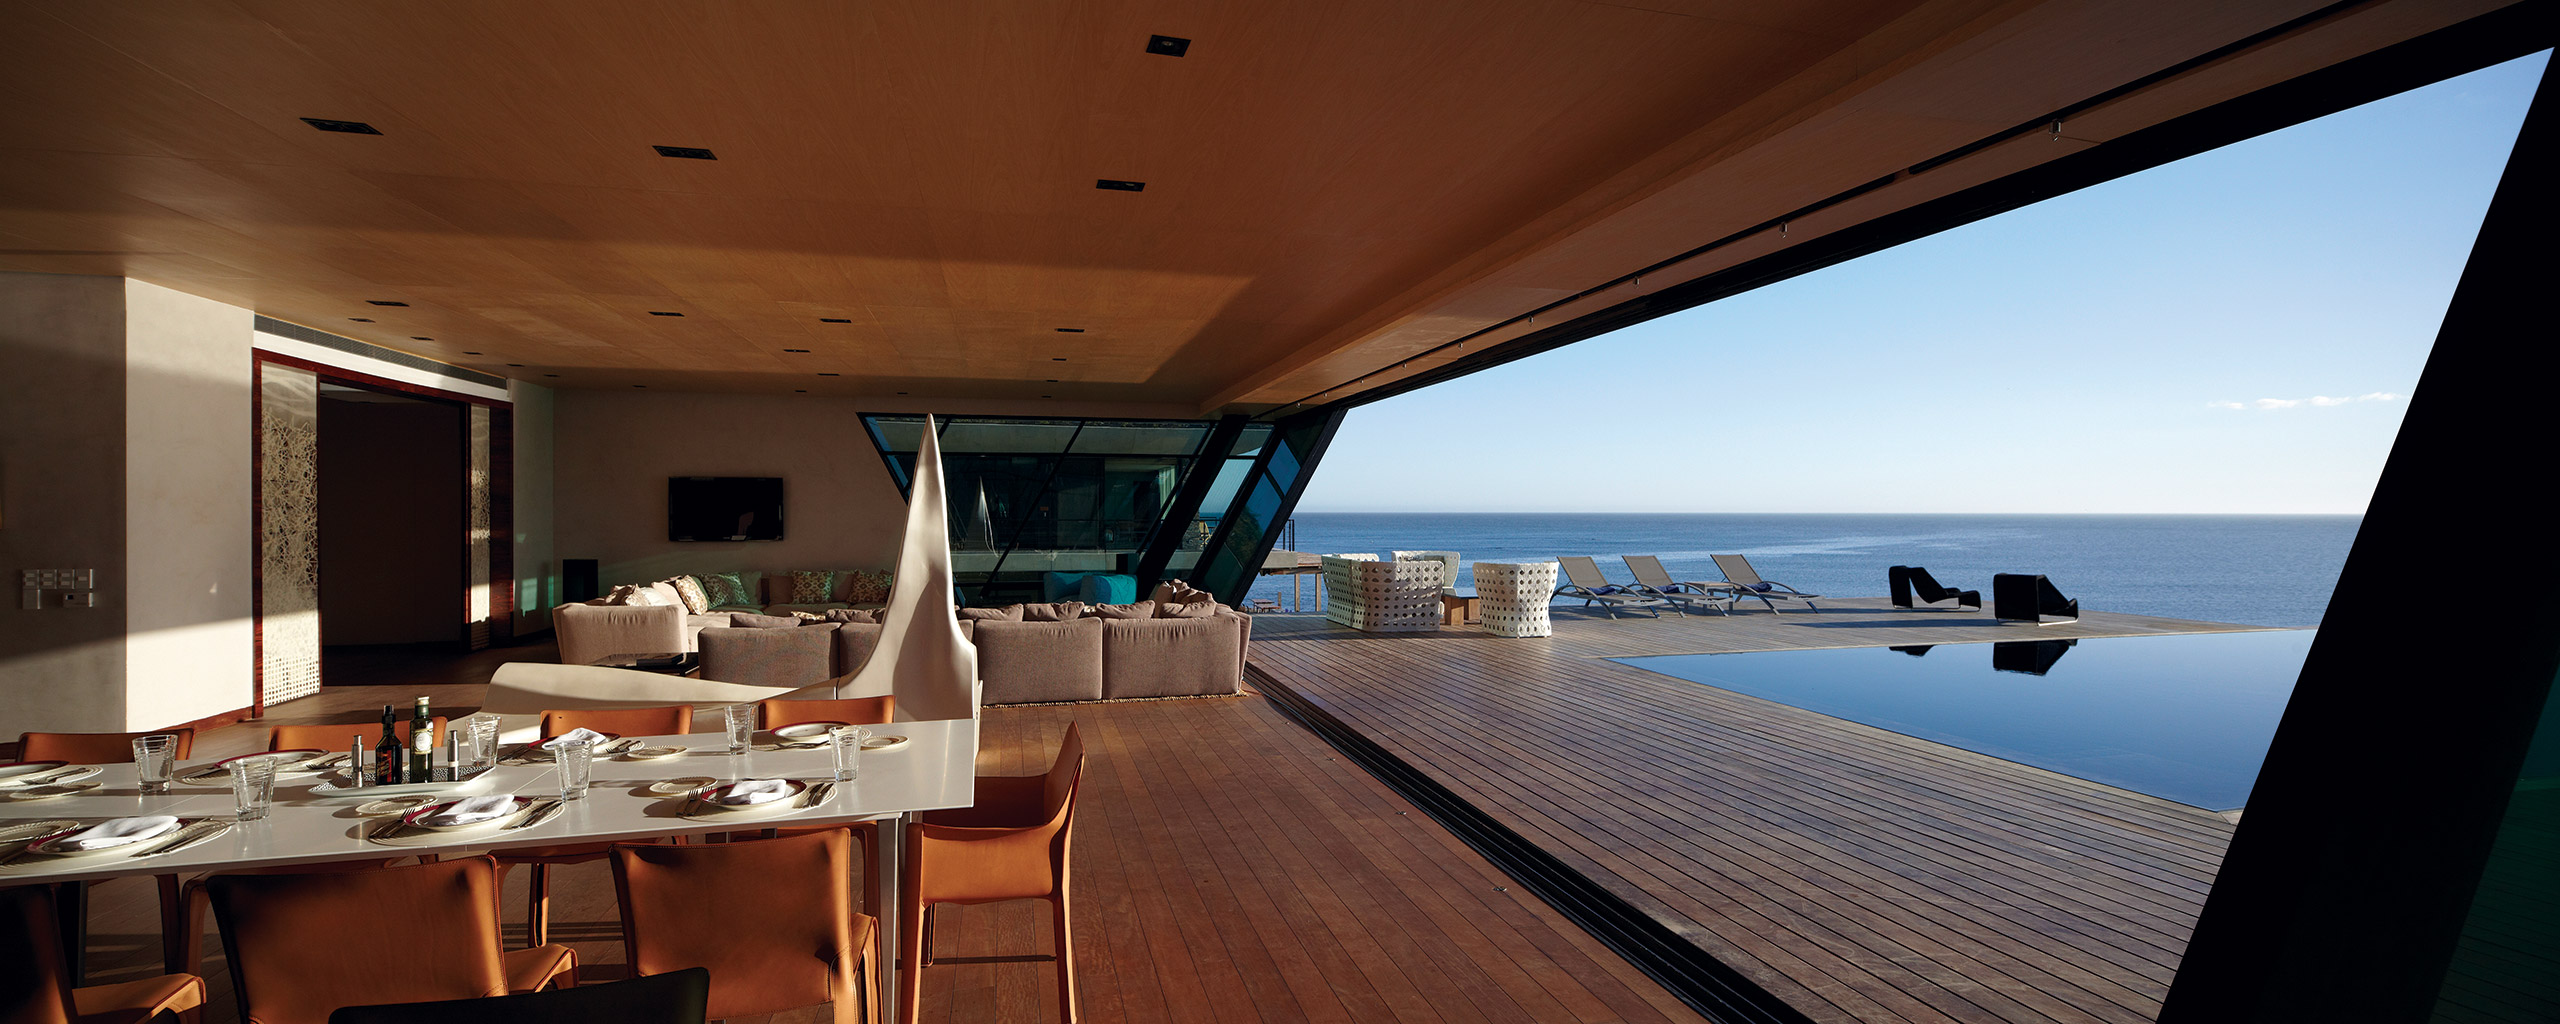                             Jos&#xE9; Ignacio may be a quiet fishing village, but there&#x2019;s still room for high design at Playa Vik, where the central building features a stocked library, works by artists like James Turrell, and a cantilevered 75-foot granite swimming pool